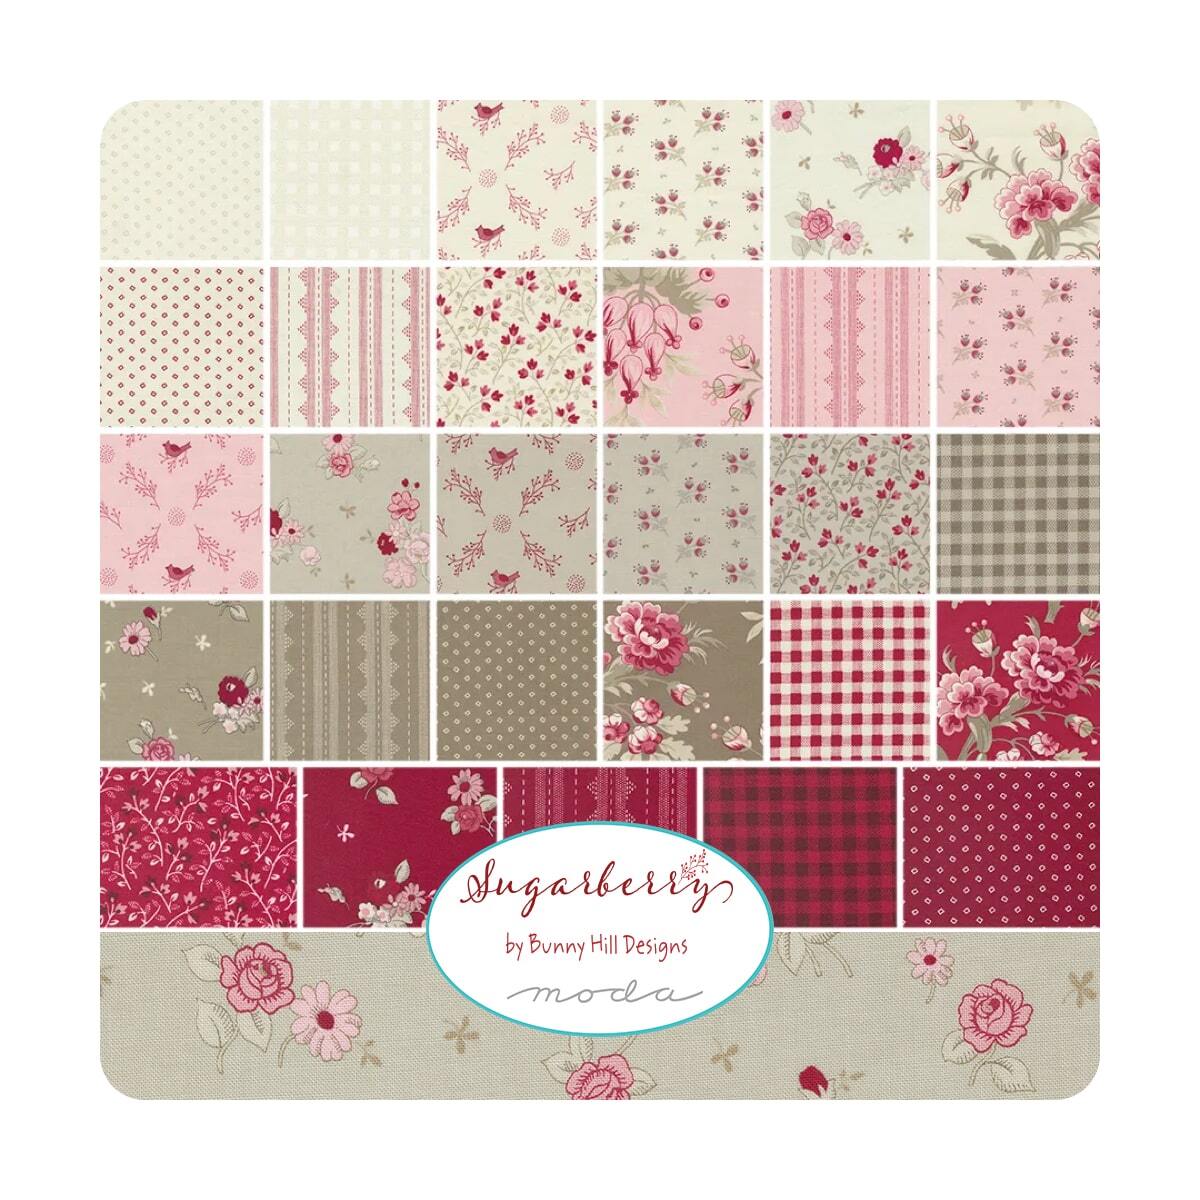 Sugarberry by Bunnyhill Designs for Moda Fabrics – bellarosequilts